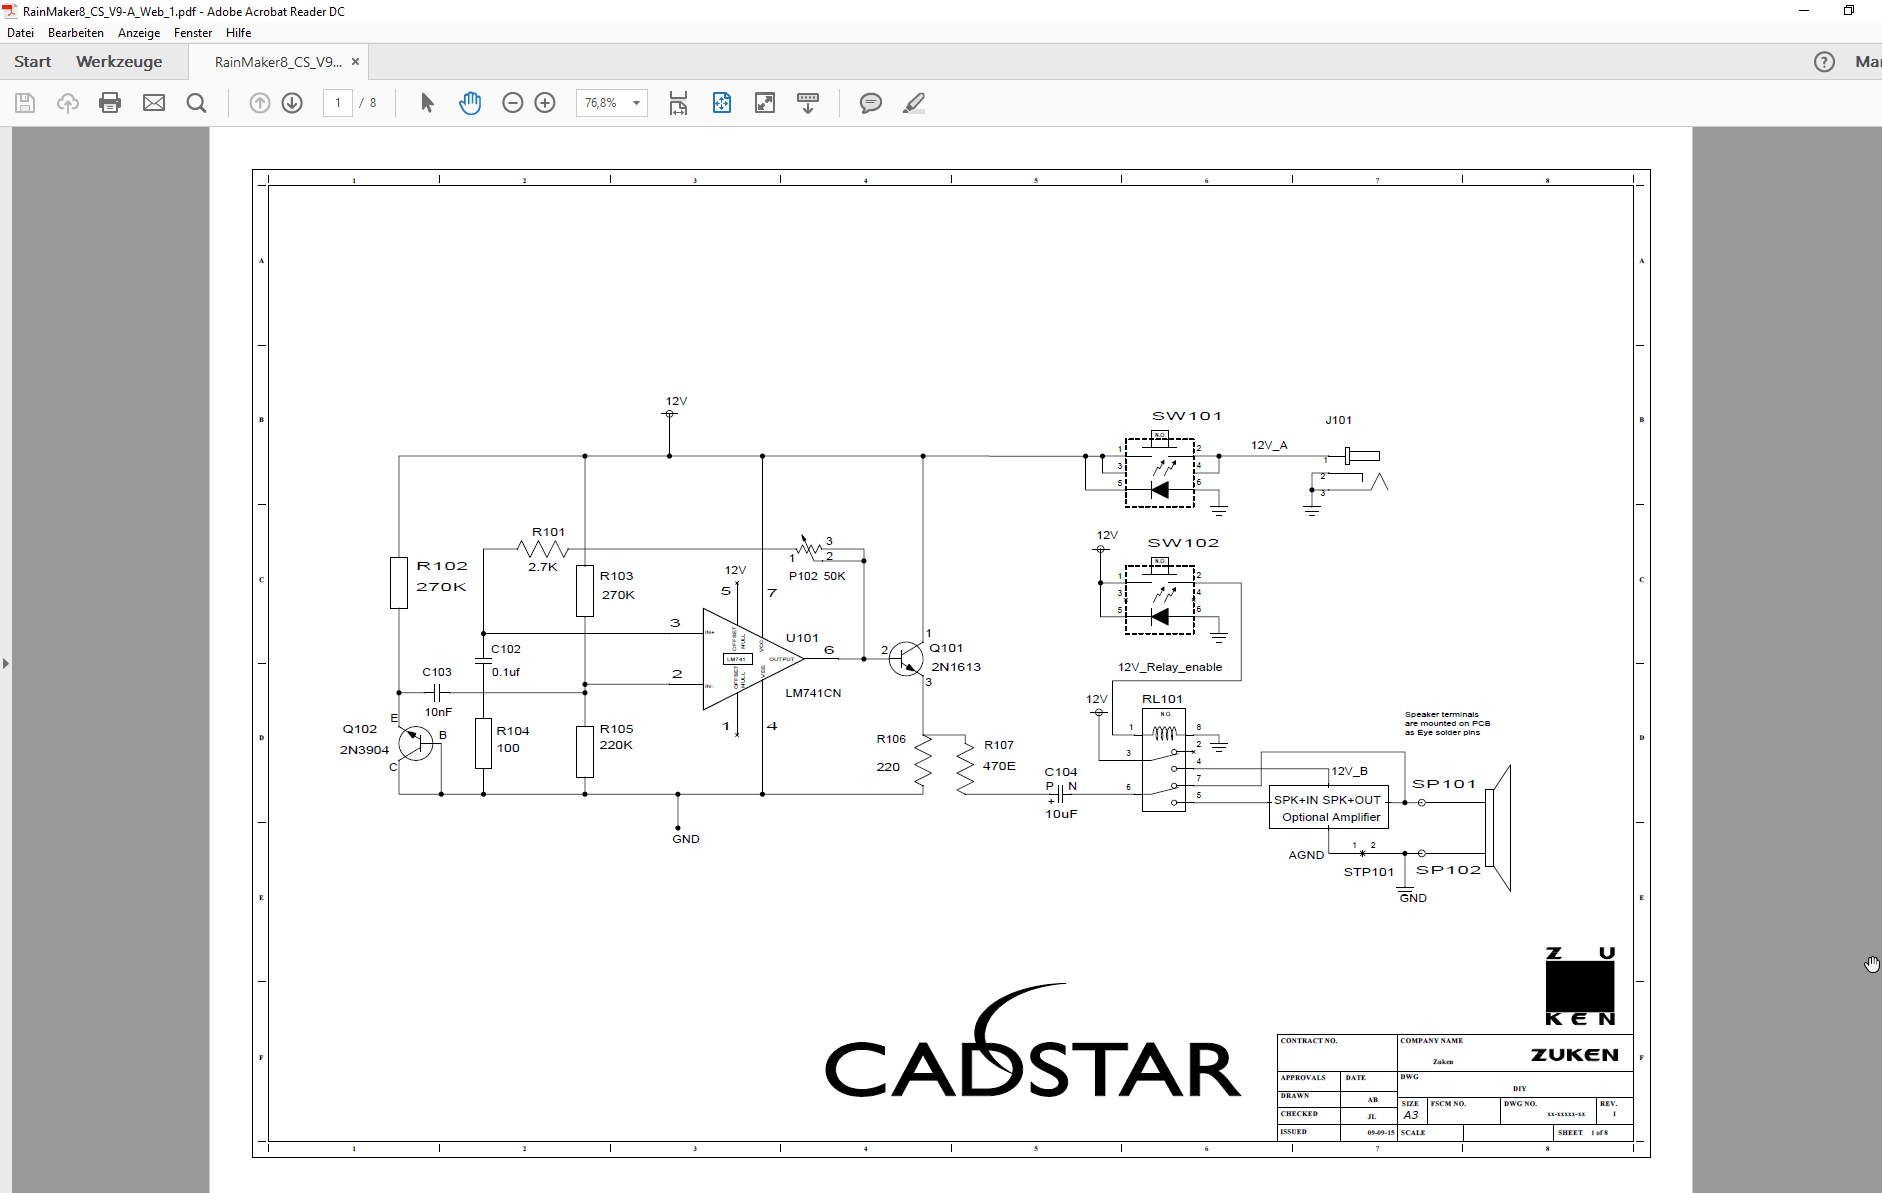 3D Promotion pcb design software cadstar professional schematics variants Bestueckungs Variante A SCM ohne non fitted PDF